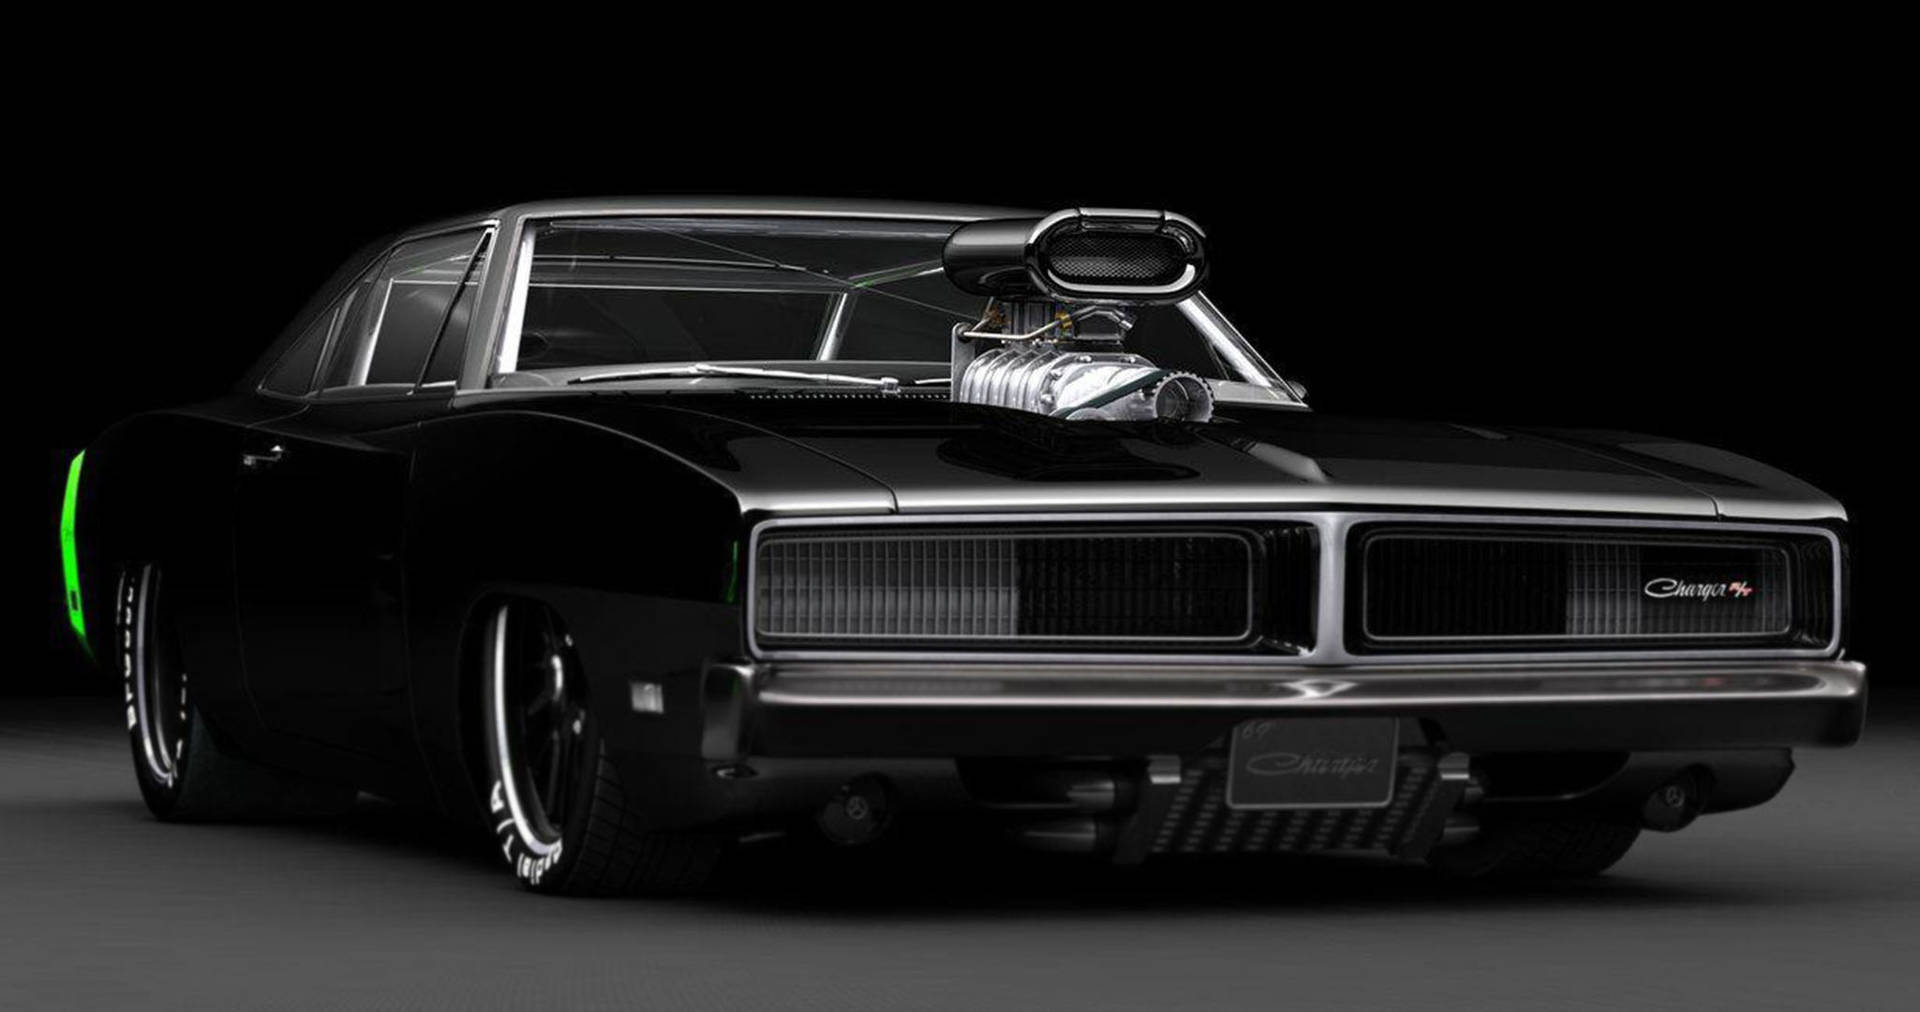 Free 1969 Dodge Charger Wallpaper Downloads, [100+] 1969 Dodge Charger  Wallpapers for FREE 